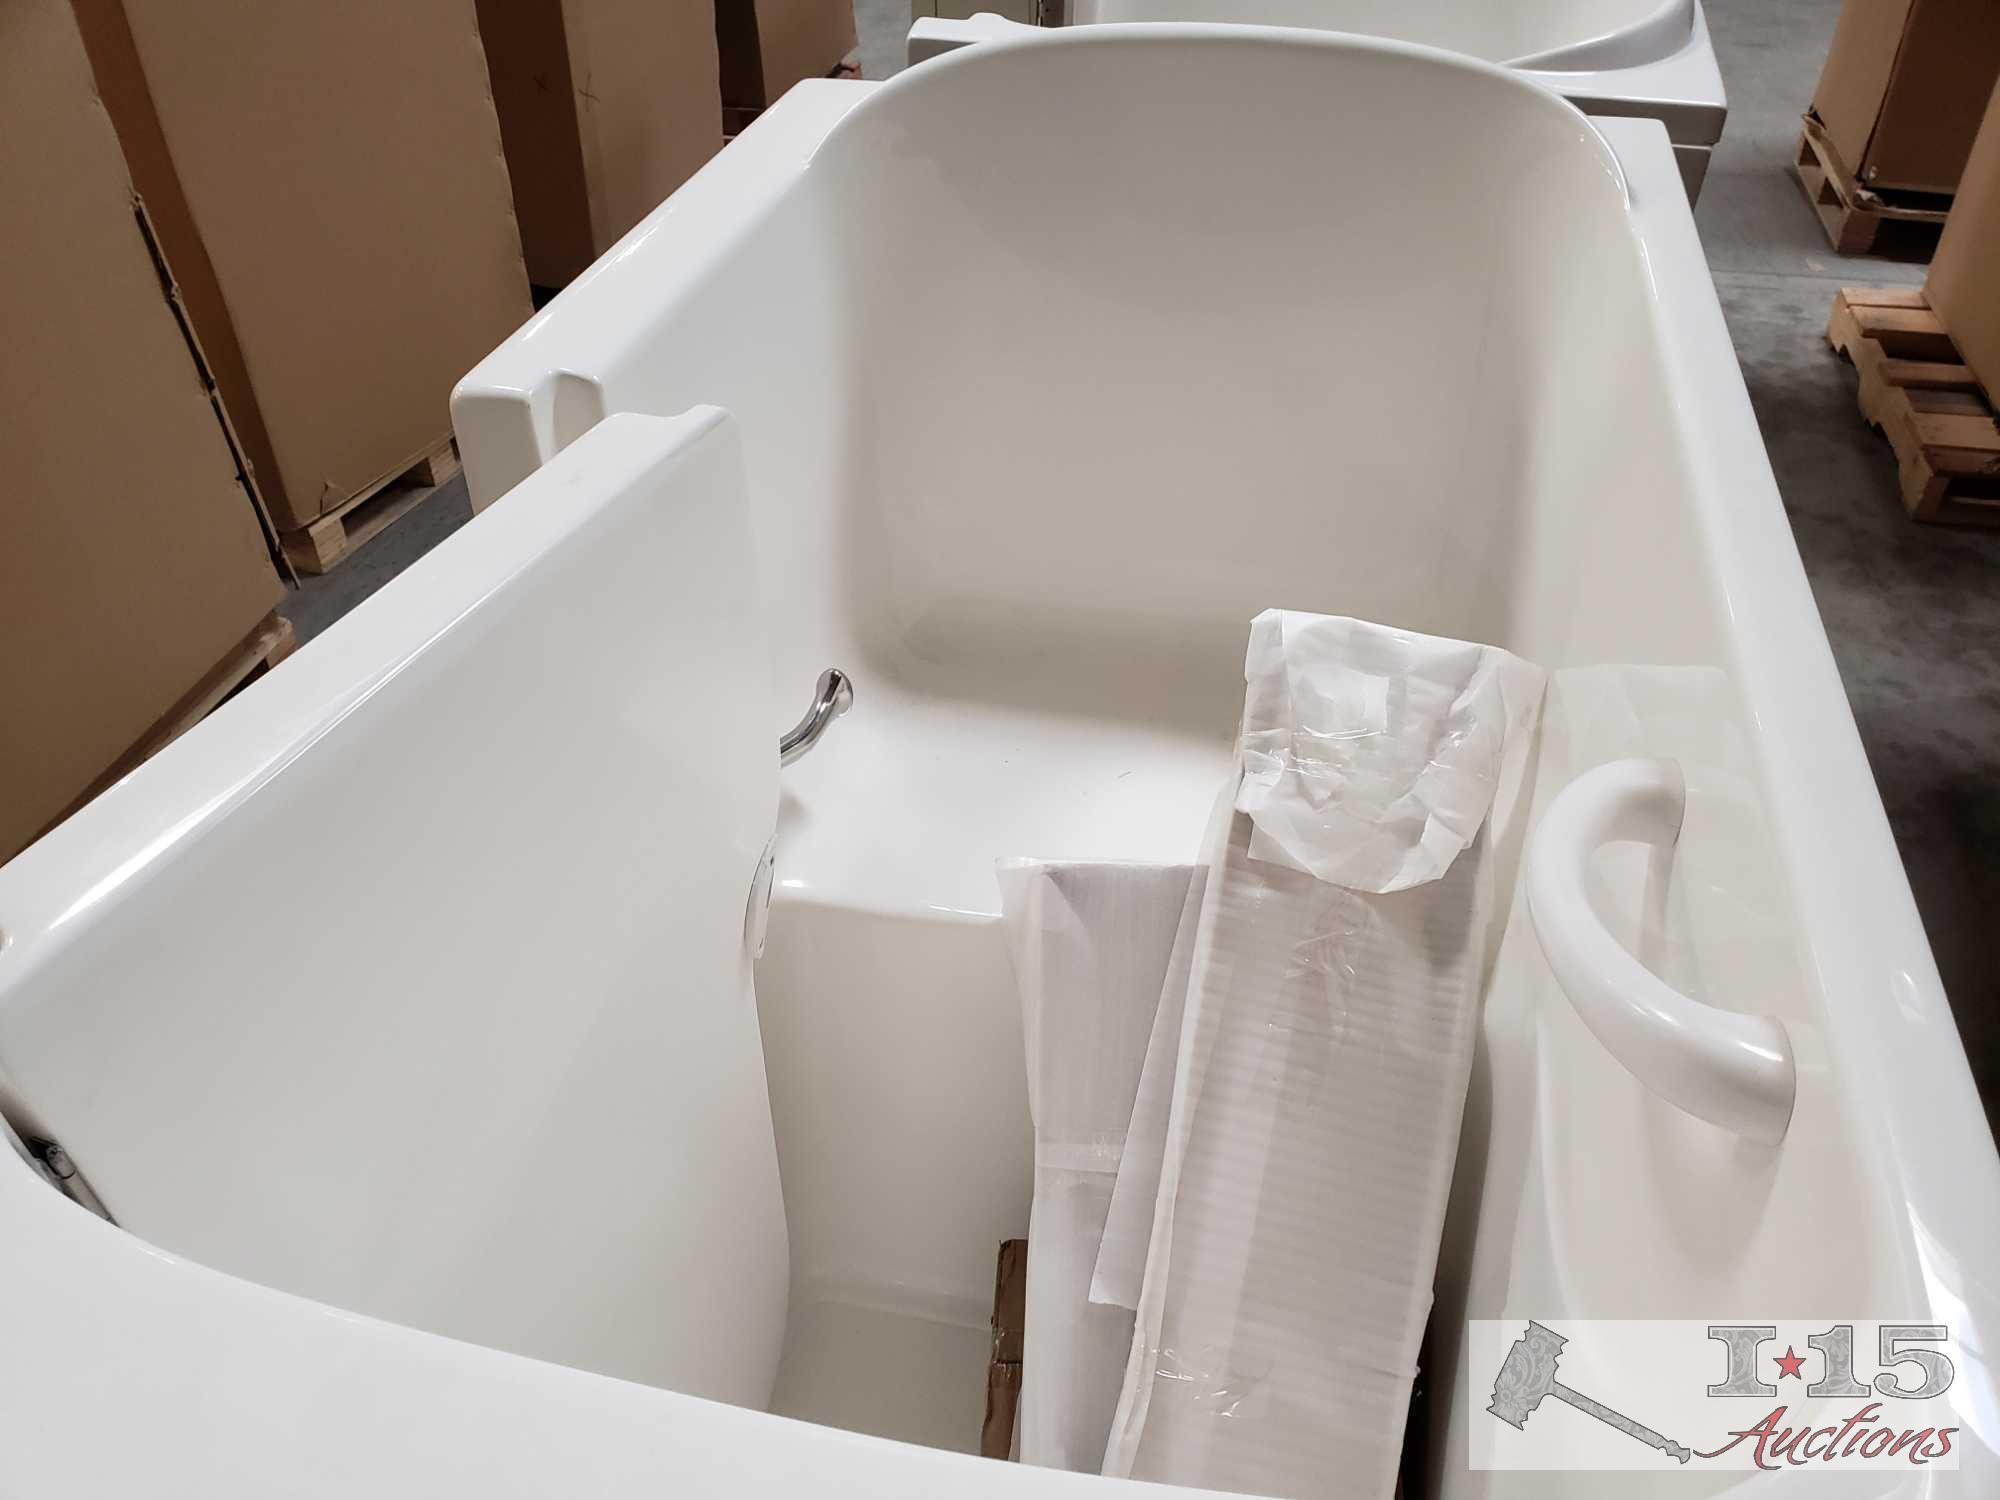 6 Therapy Tubs, Various Models and Sizes